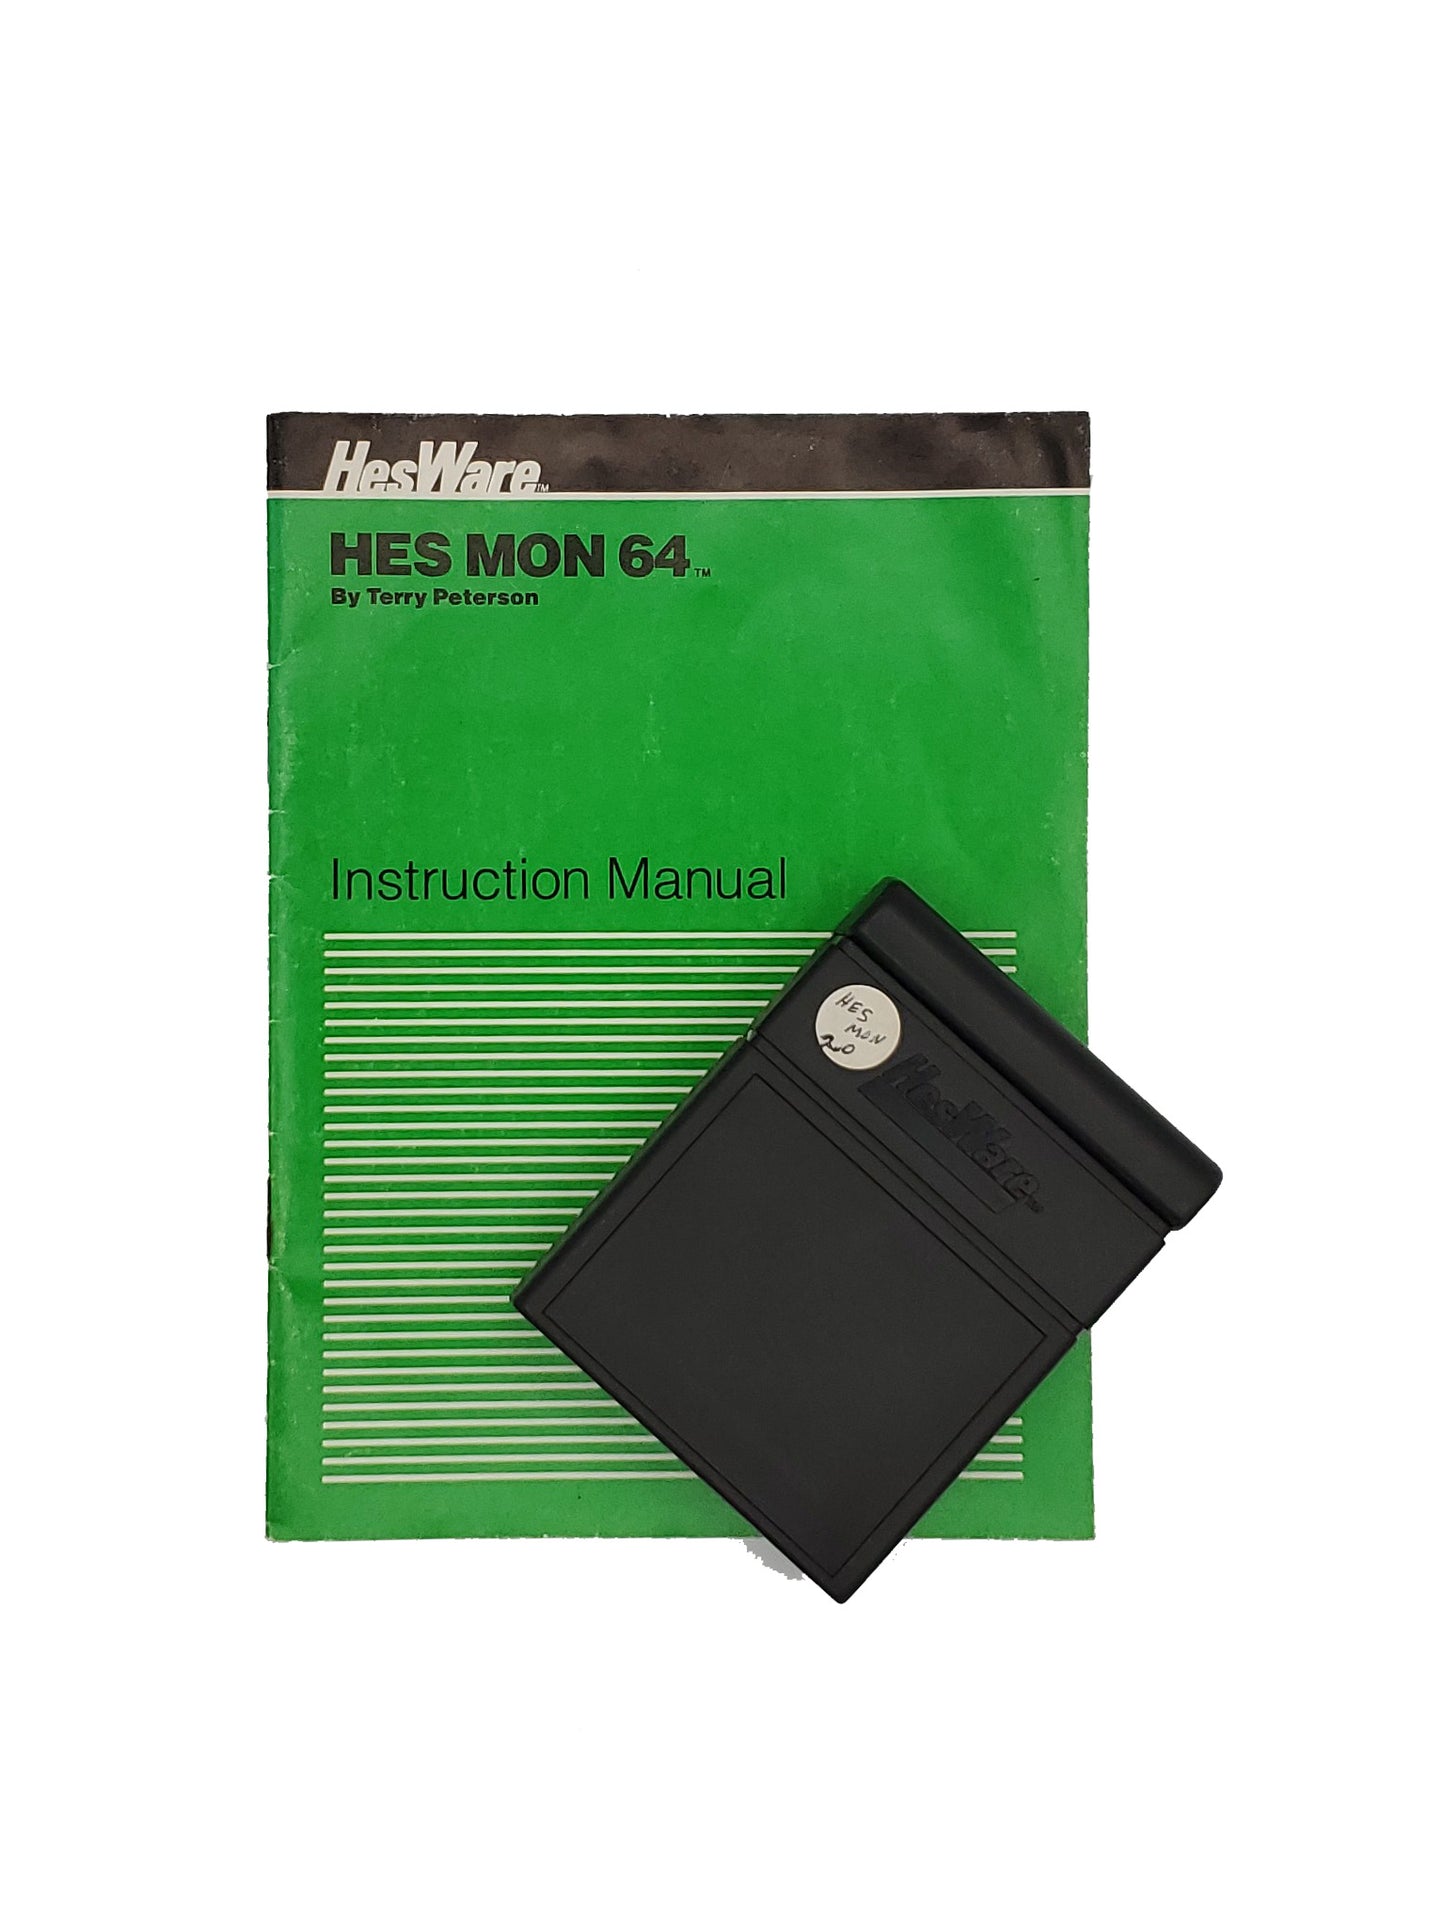 Hes Mon 64 v2 Cartridge with Manual